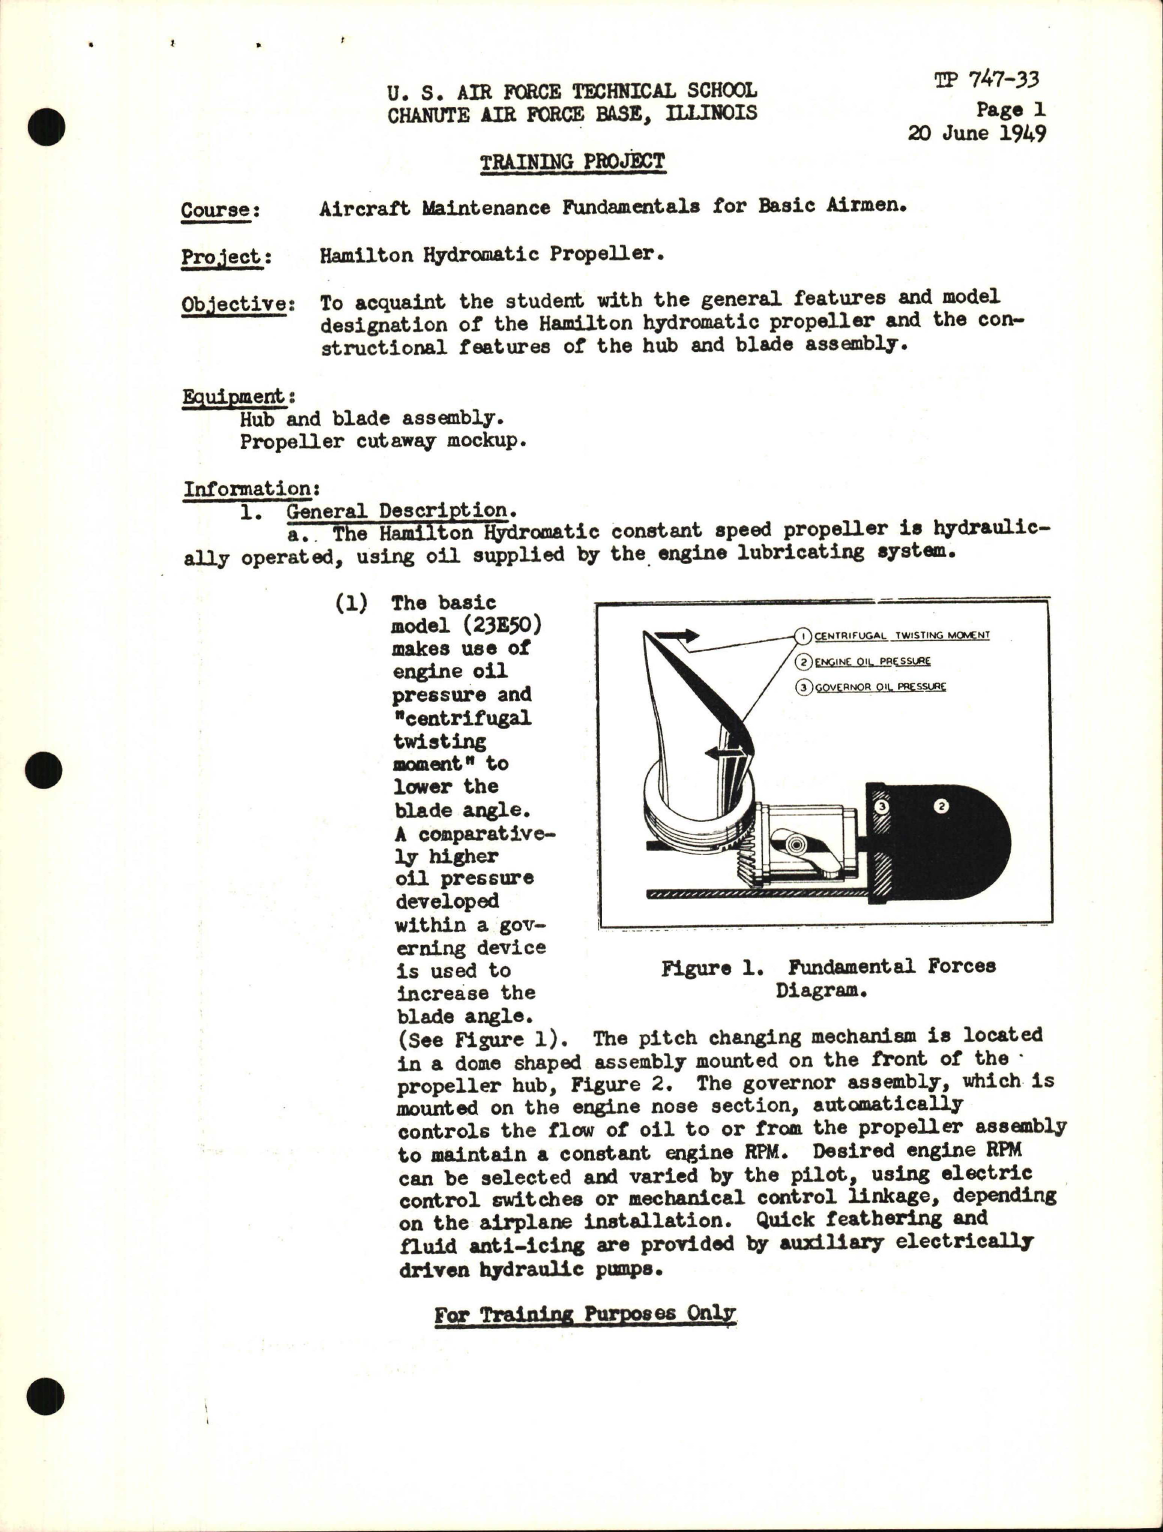 Sample page 1 from AirCorps Library document: Training Project, Hamilton Hydromatic Propeller